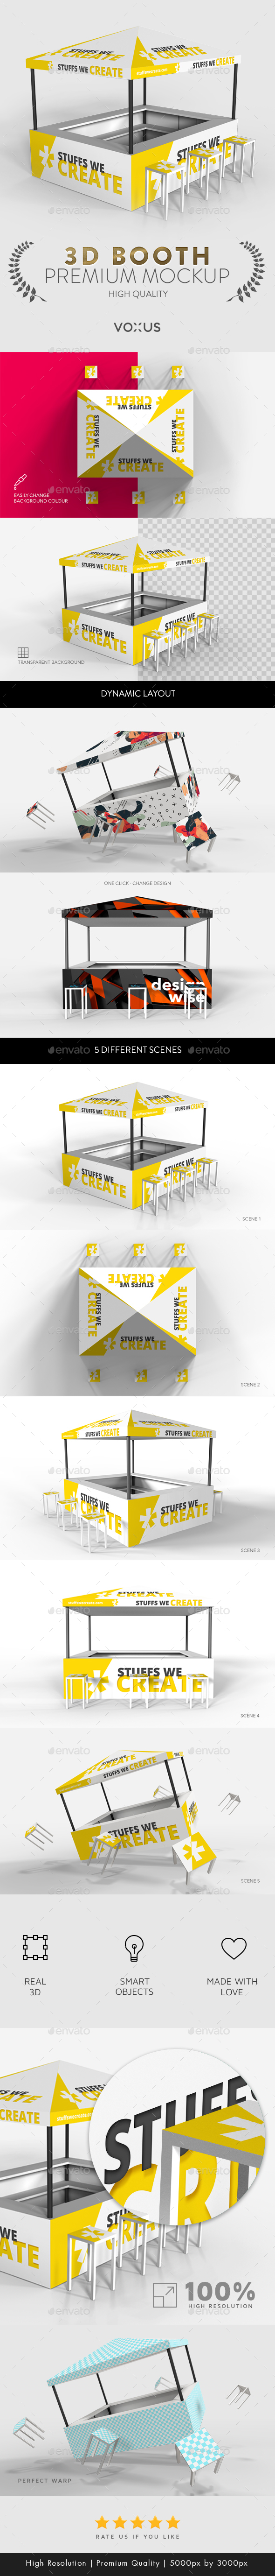 Exhibition | Event - Booth Mockup